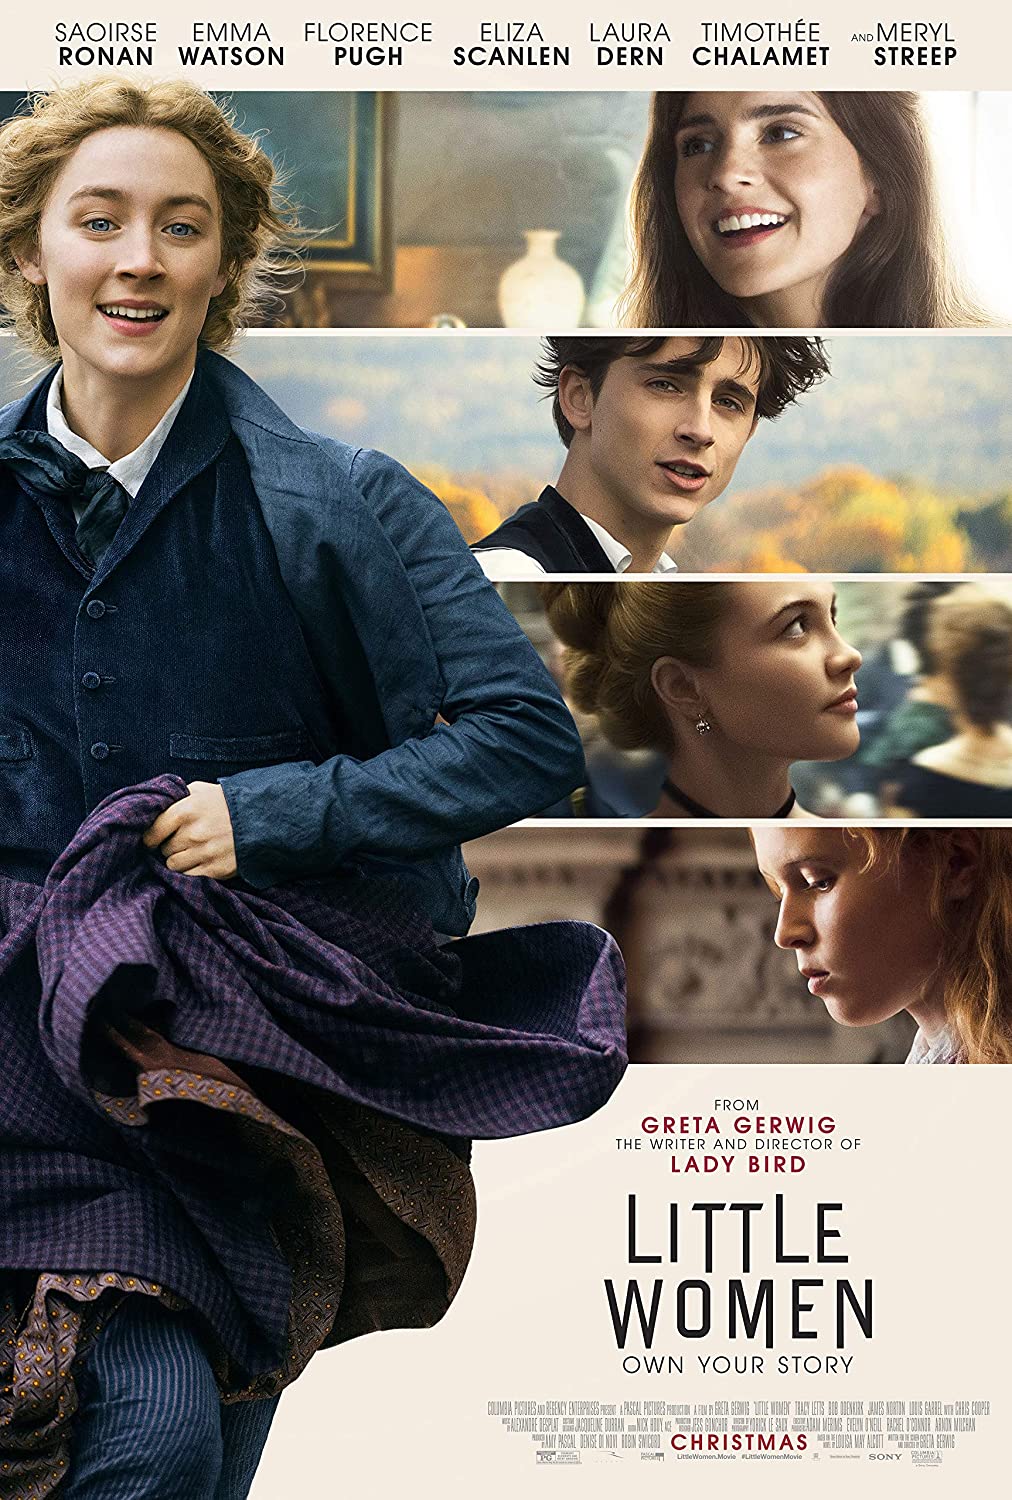 Poster for Film "Little Women" with images of cast